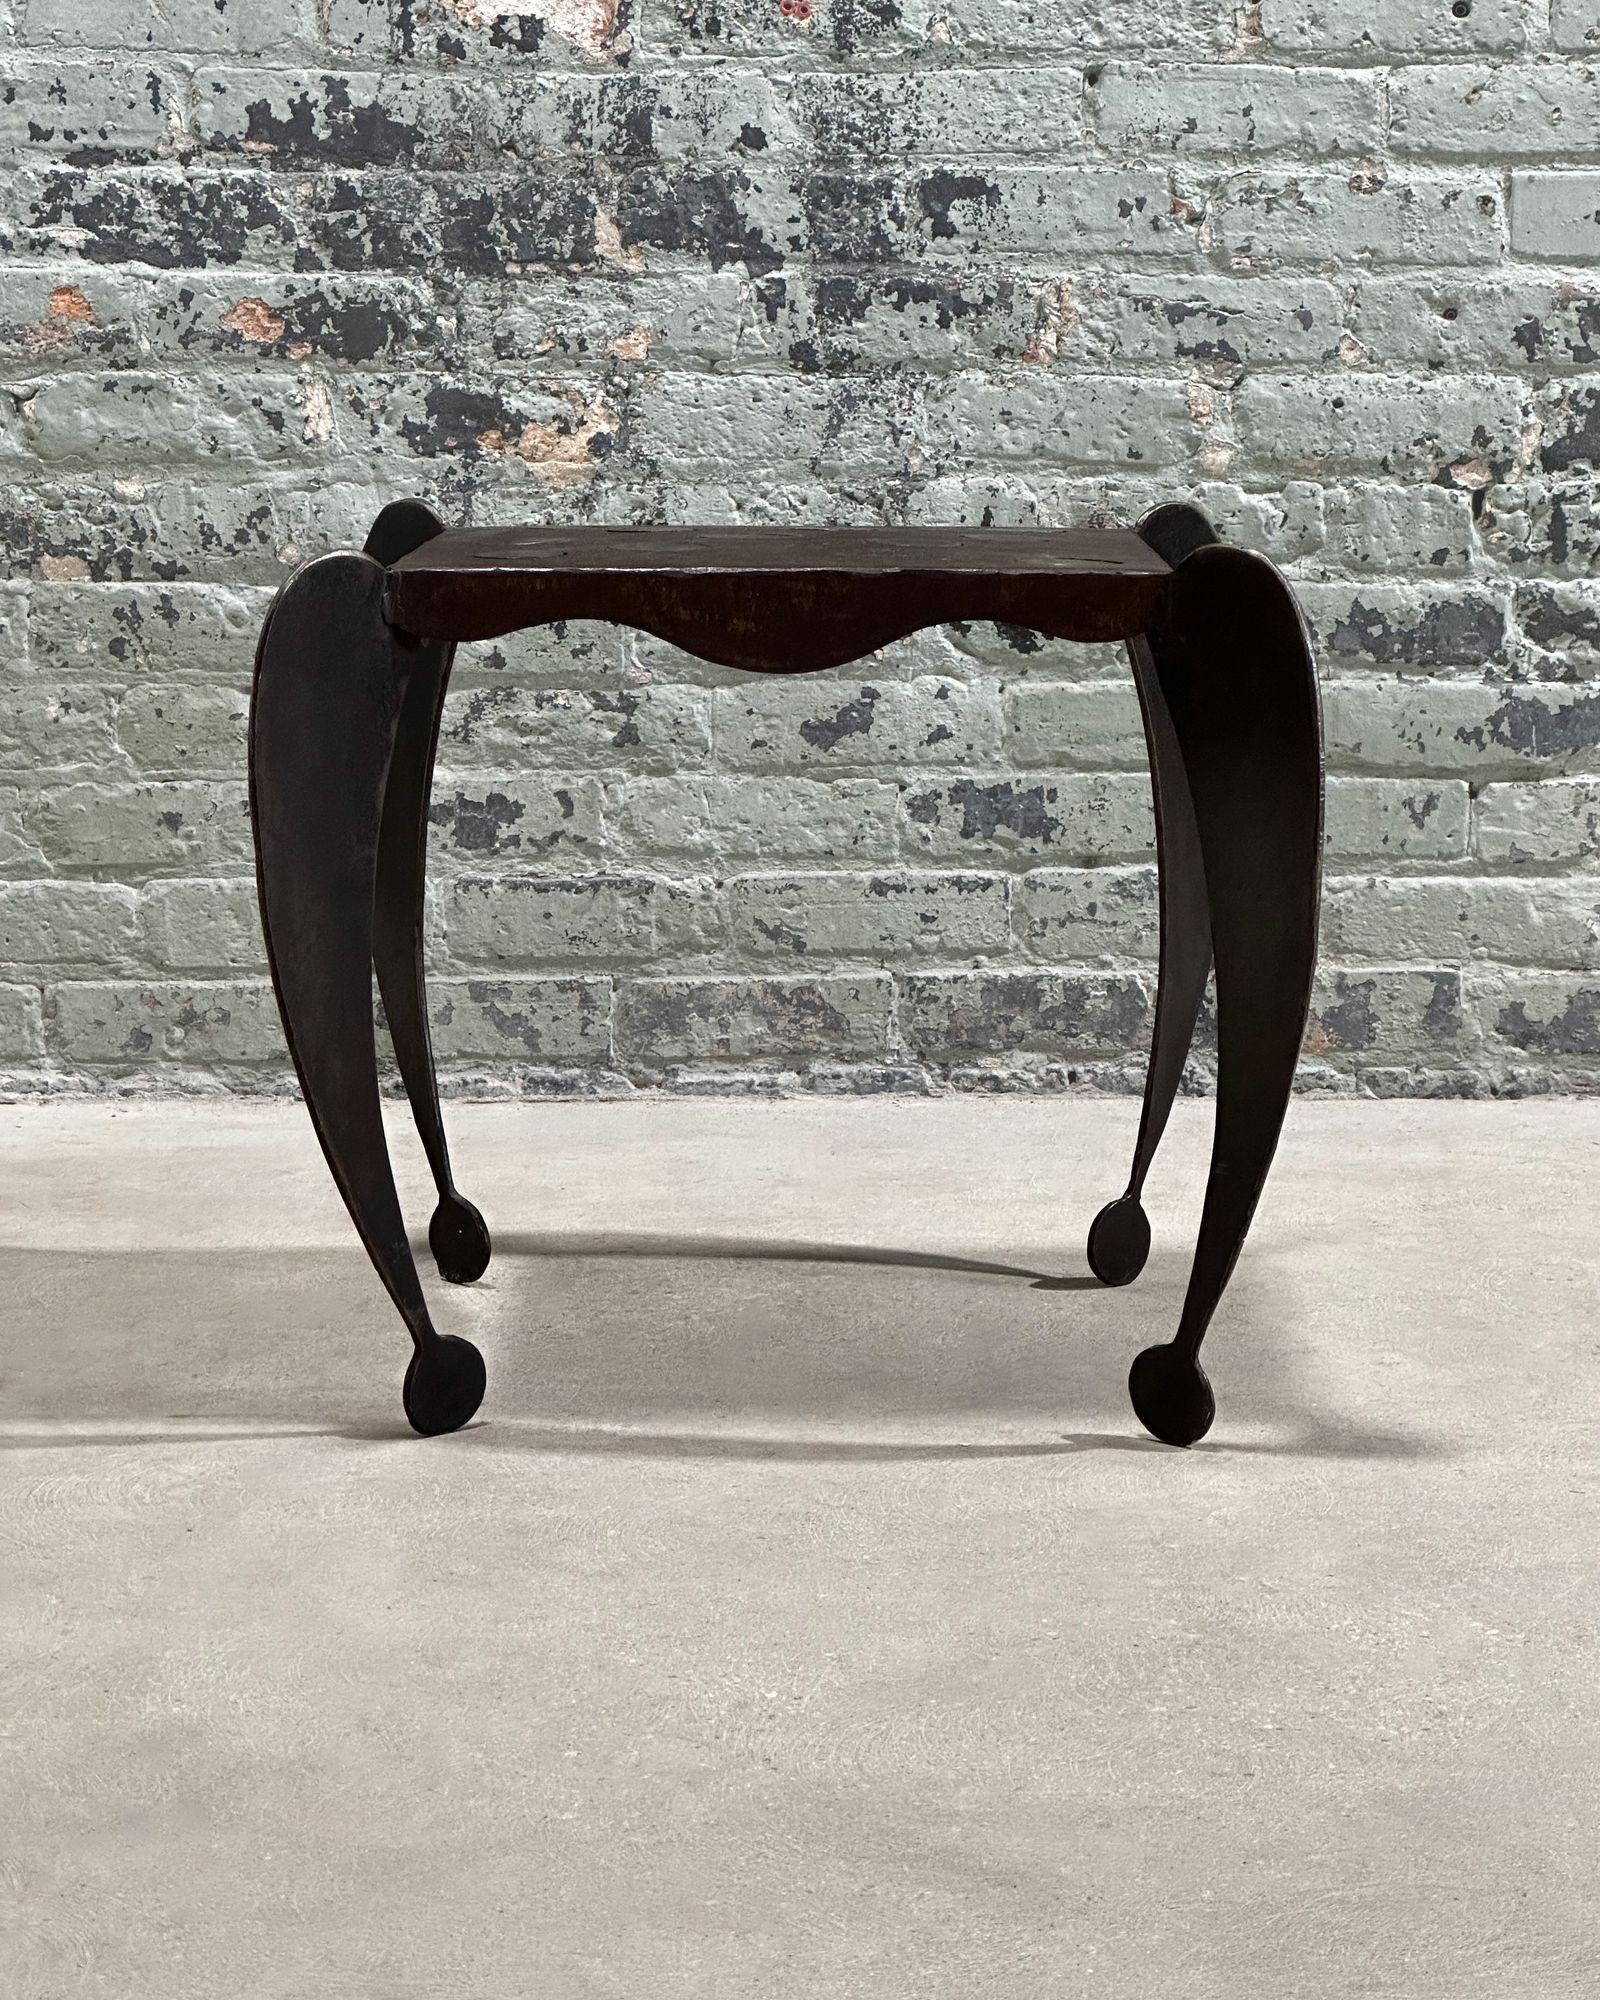 Sculptural Steel Side/End Table in the Style of Giacometti, 1970
Measures 20.5